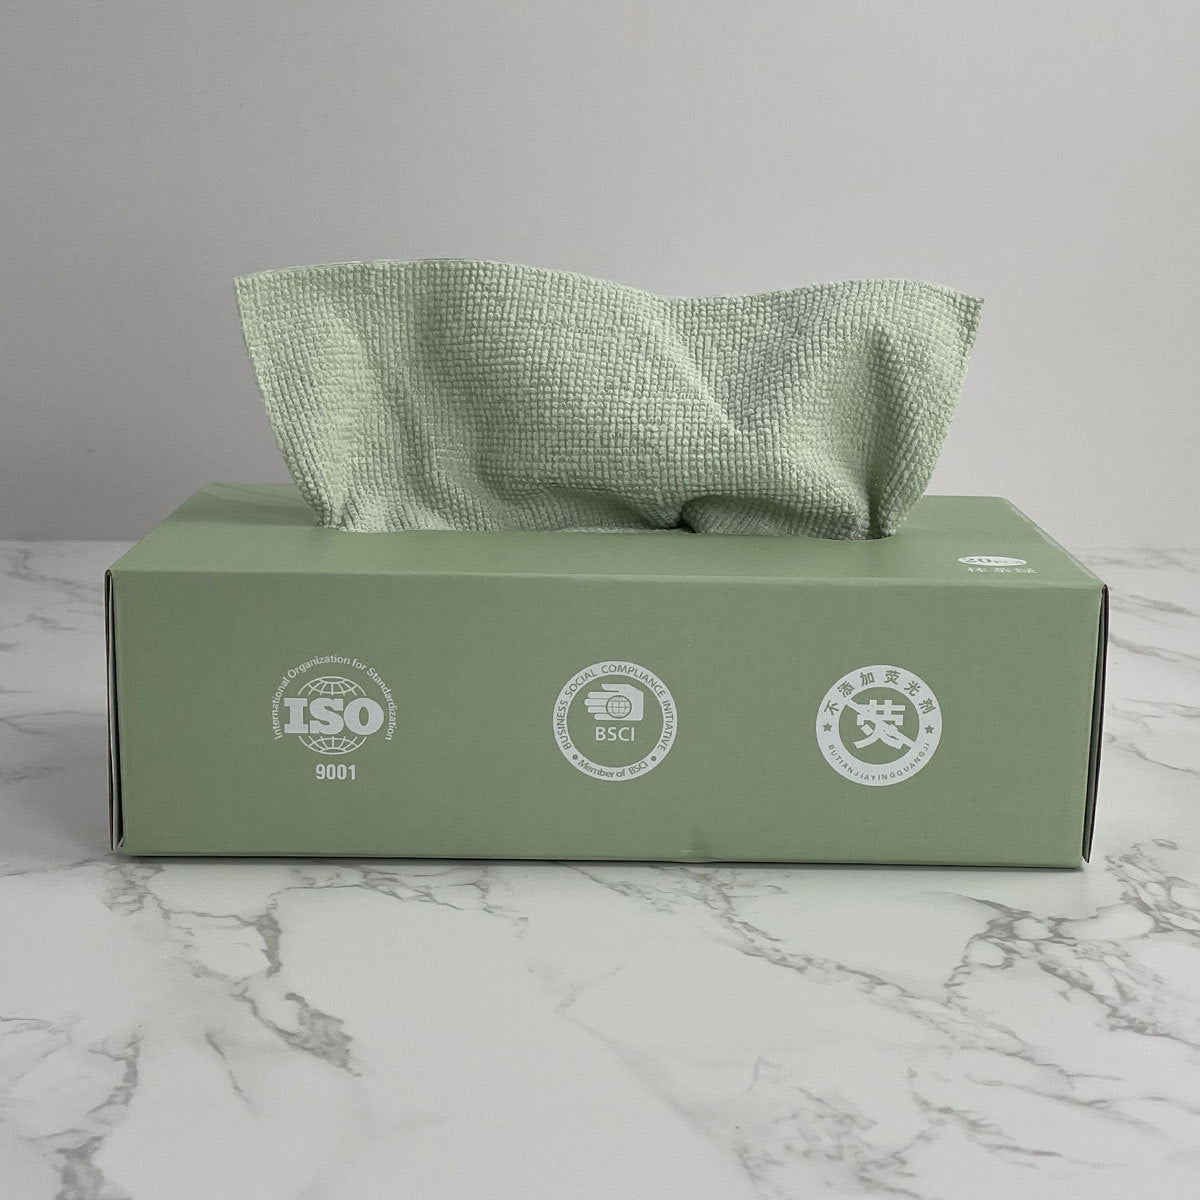 Reusable Microfiber Cloth Water Oil Absorbent Dish Cloth Towel with box in green color